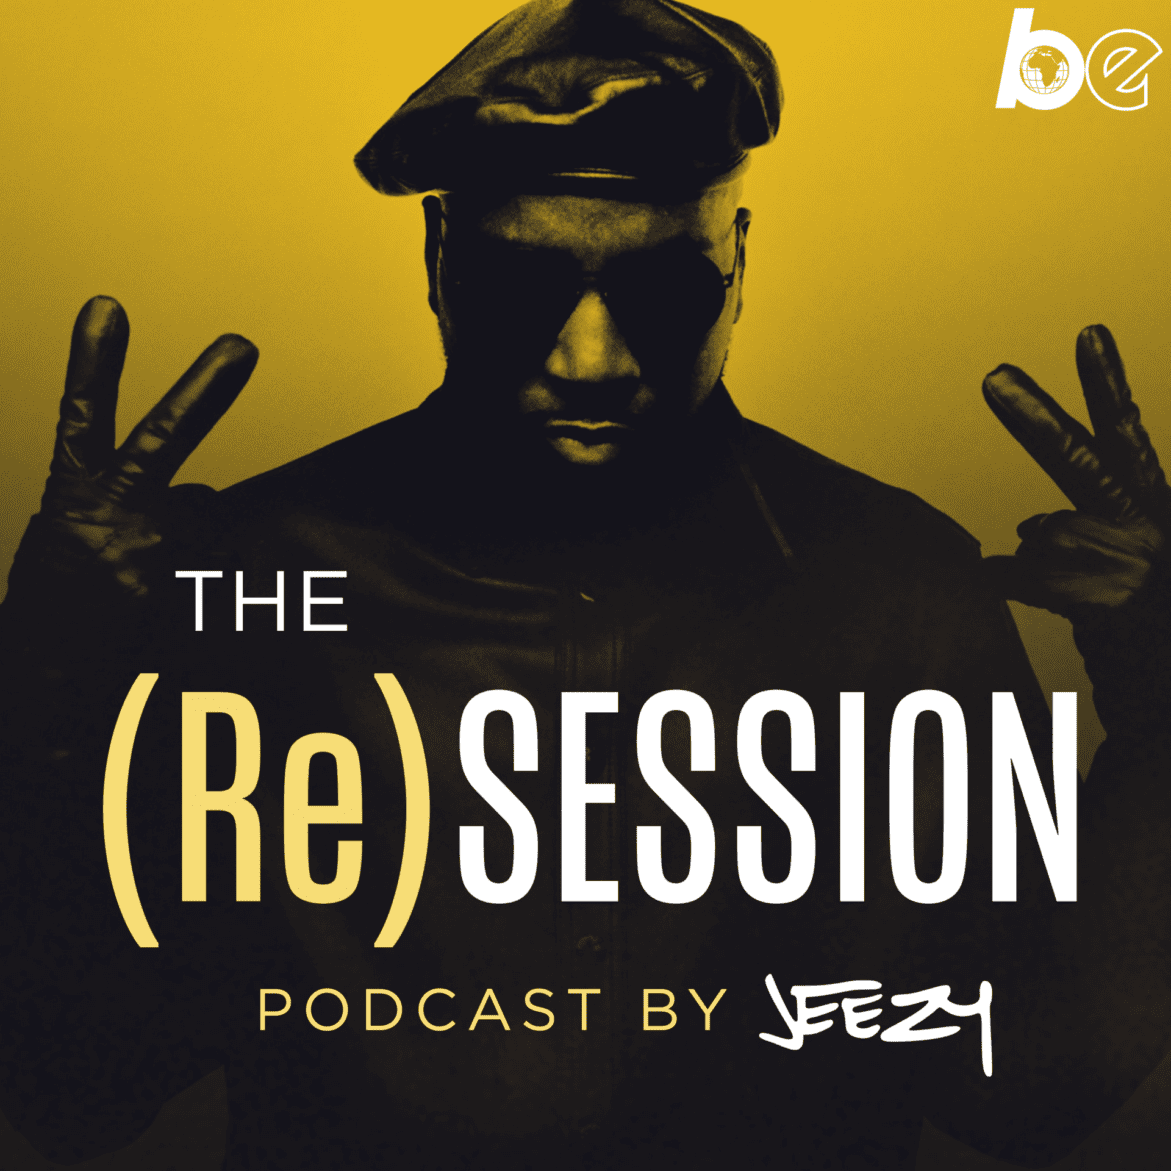 Black Podcasting - Introducing: The (Re)Session Podcast by Jeezy